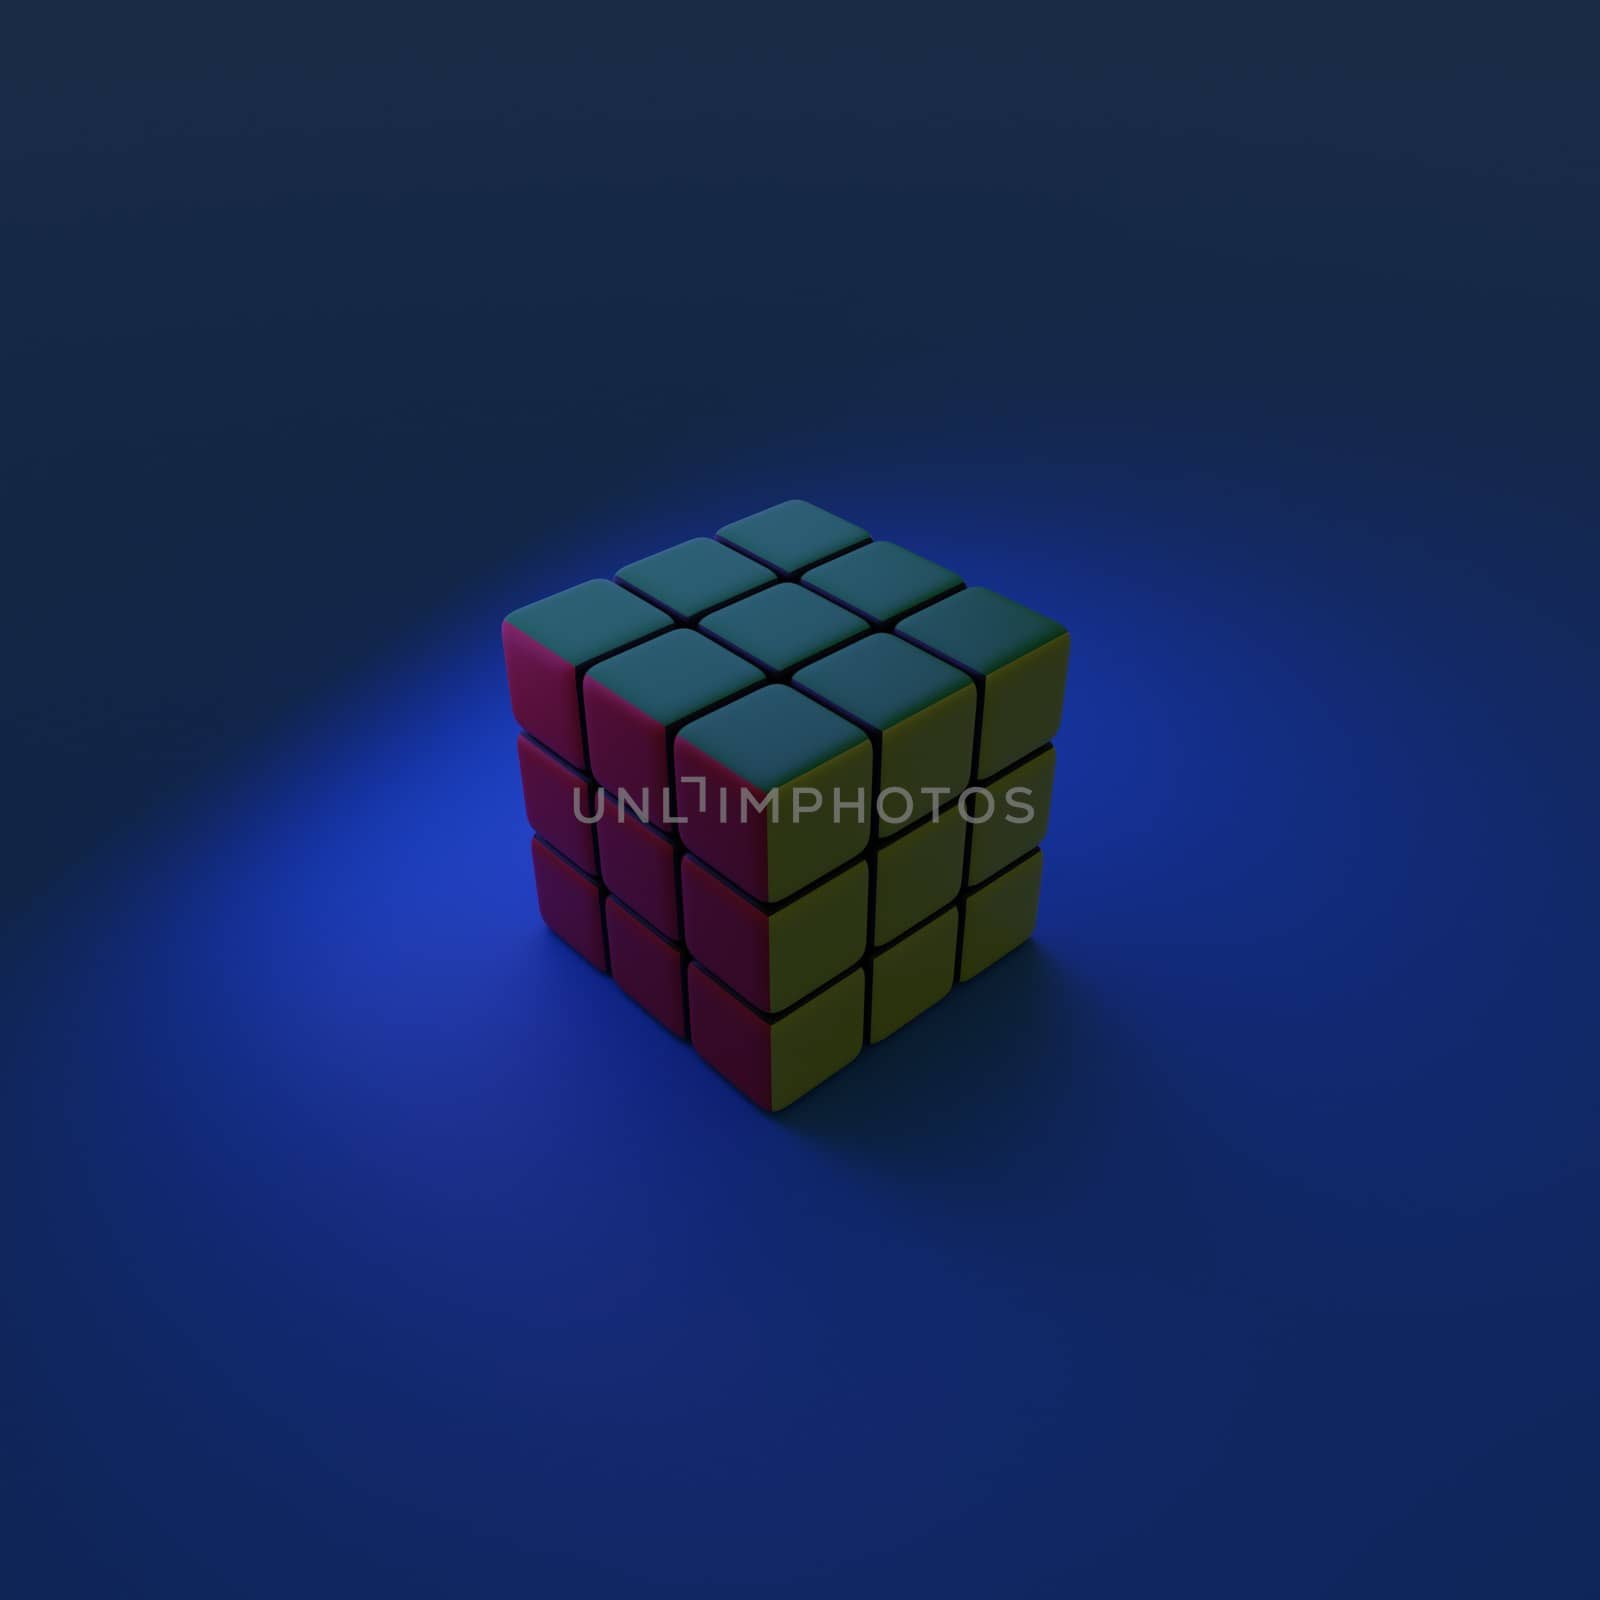 rubik's cube 3d render. Abstraction illustration. puzzle cube. by zaryov